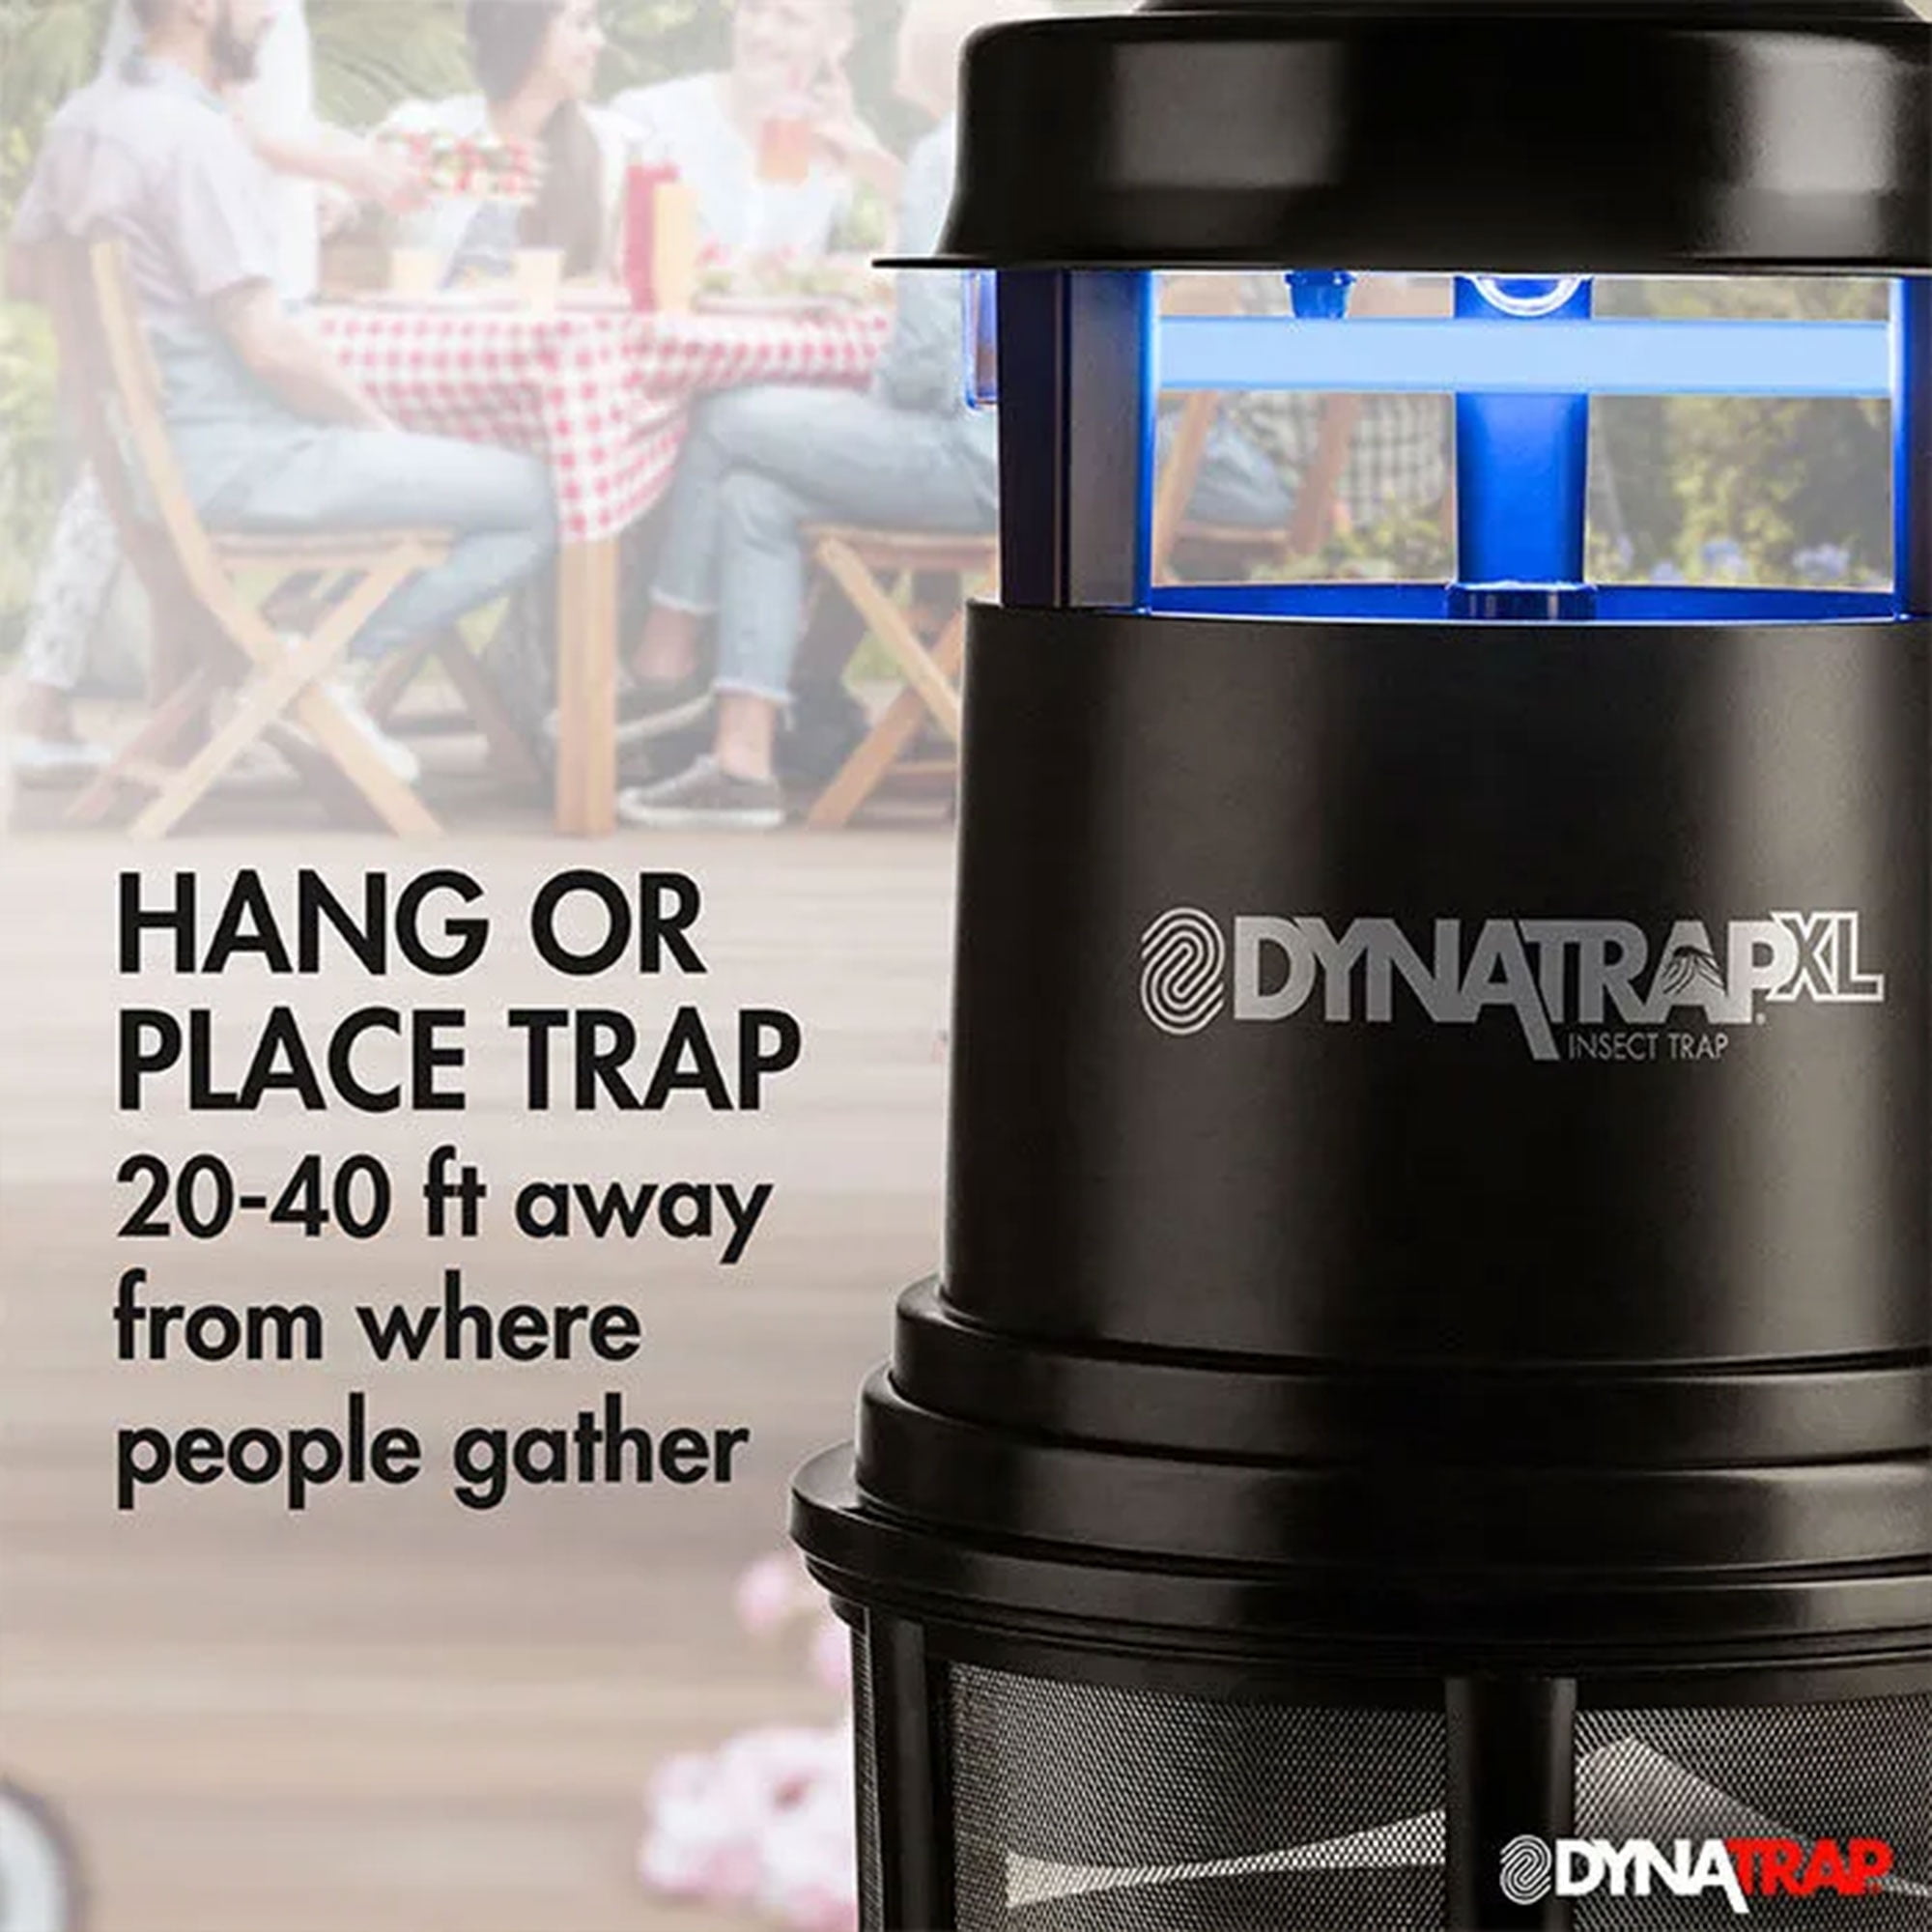 Dynatrap Dt2000xl Full Acre Corded All Weather Mosquito And Flying Insects  Trap : Target